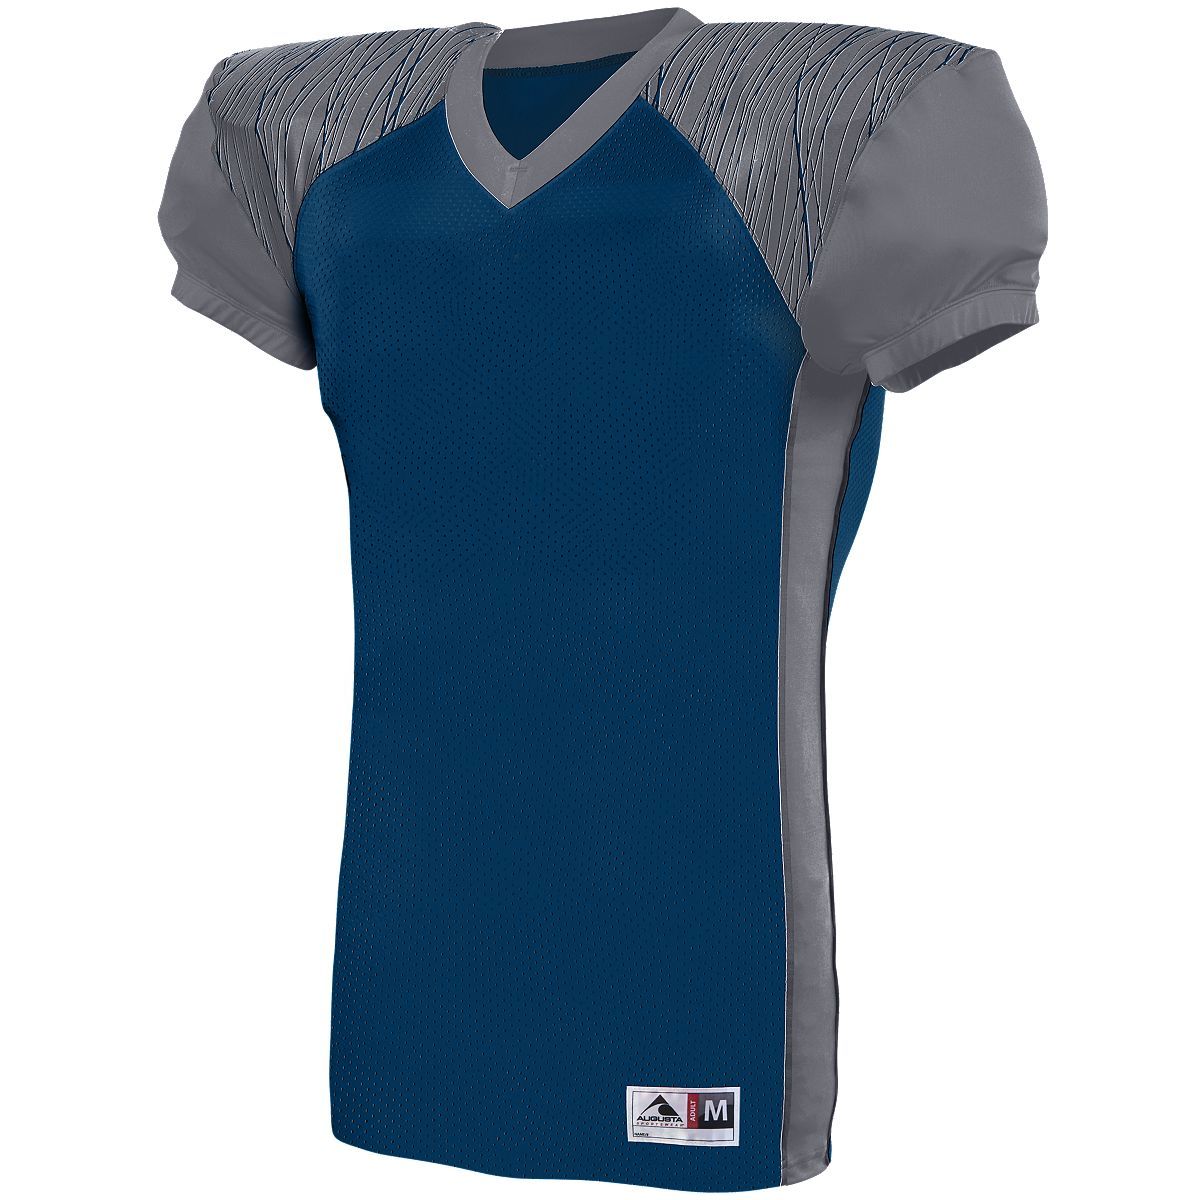 Augusta Sportswear Zone Play Jersey in Navy/Graphite/Navy Print  -Part of the Adult, Adult-Jersey, Augusta-Products, Football, Shirts, All-Sports, All-Sports-1 product lines at KanaleyCreations.com